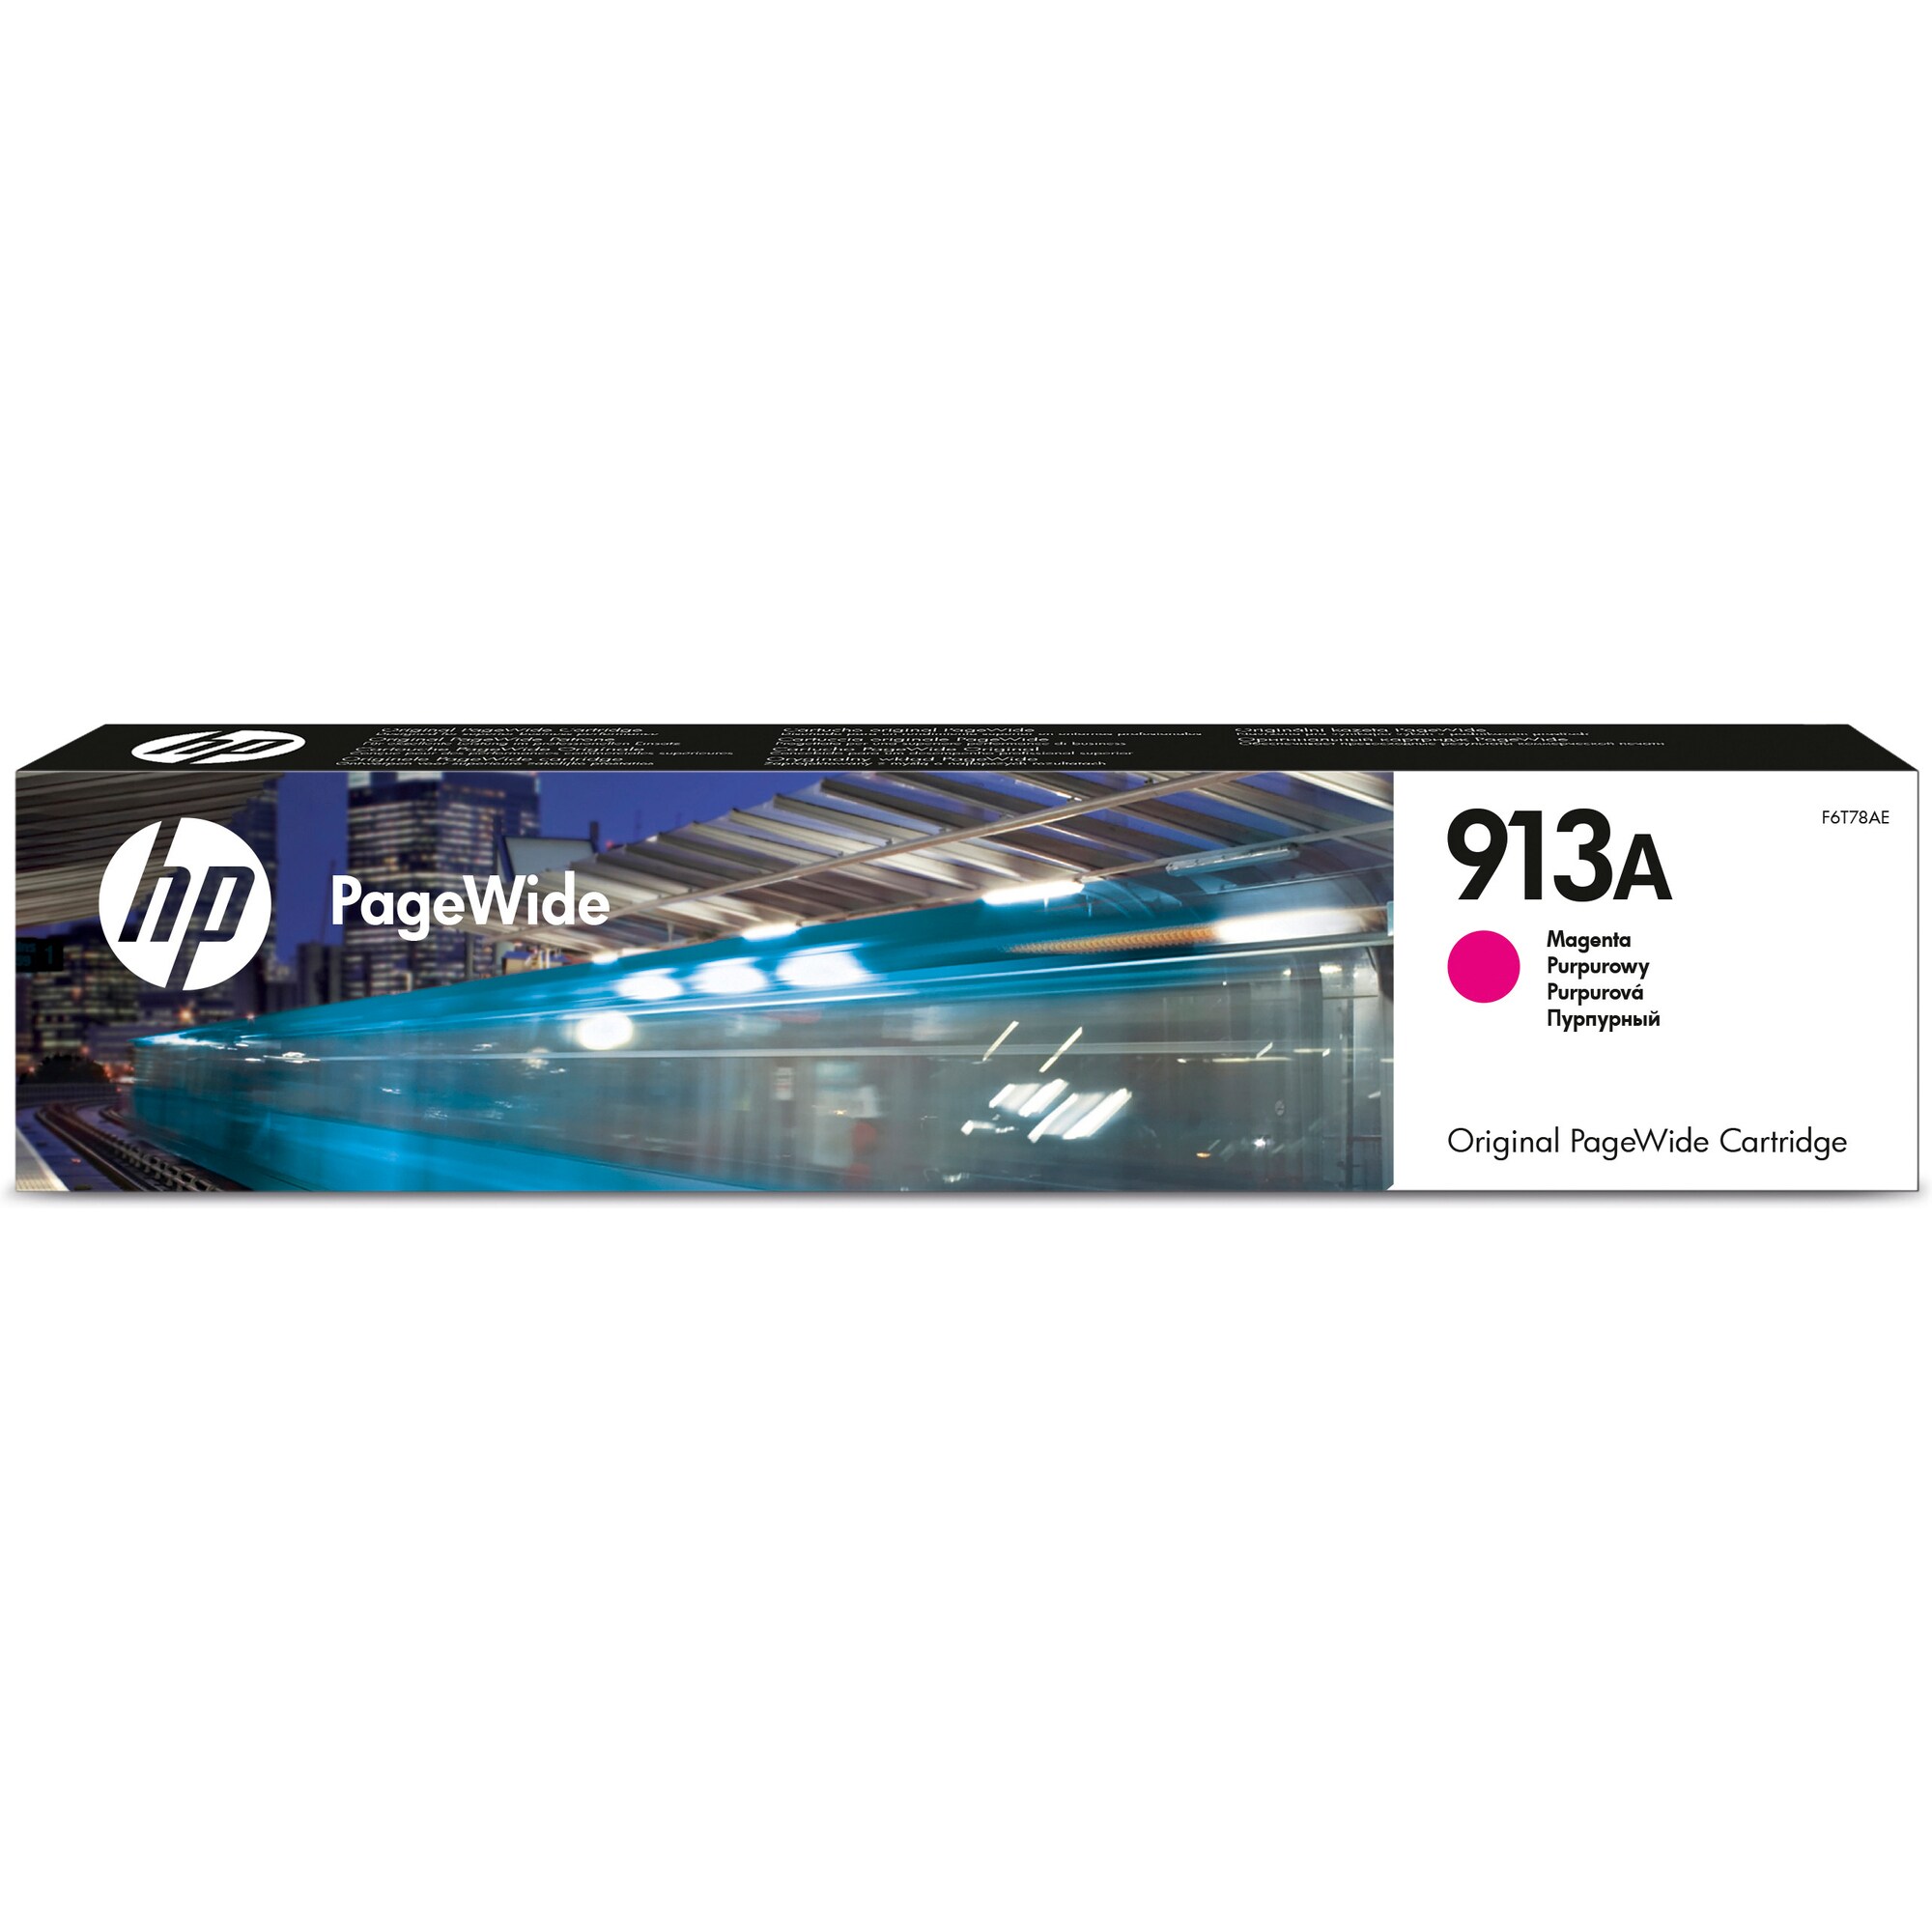 HP 913A Magenta Original PageWide Cartridge (3, 000 pages)0 